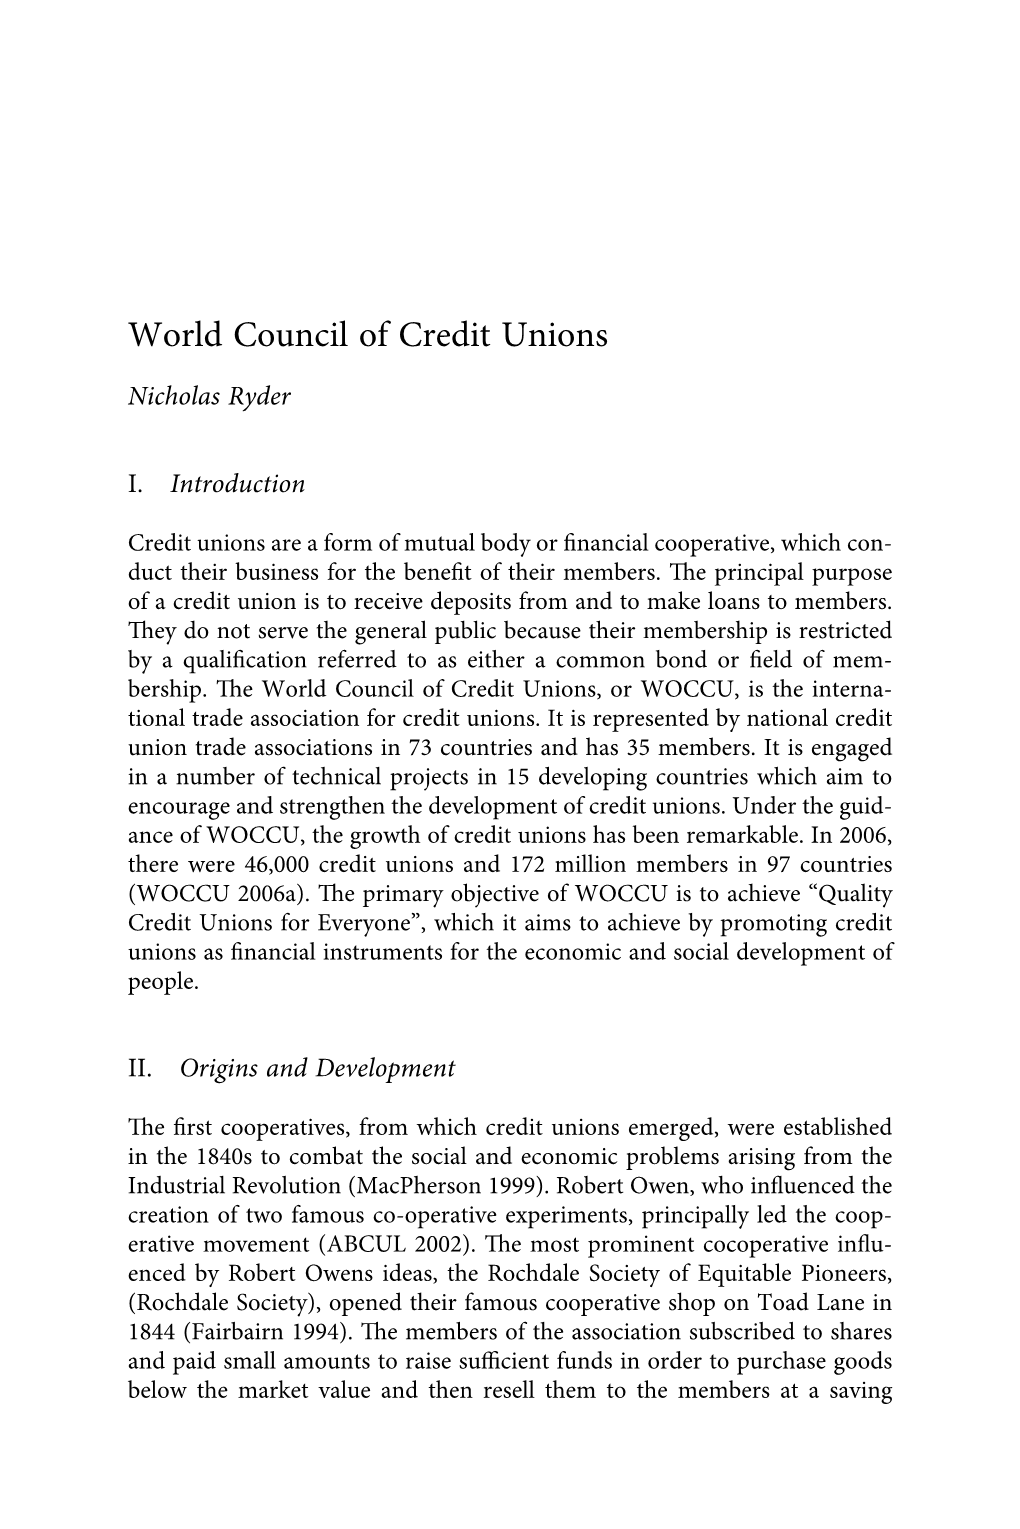 World Council of Credit Unions